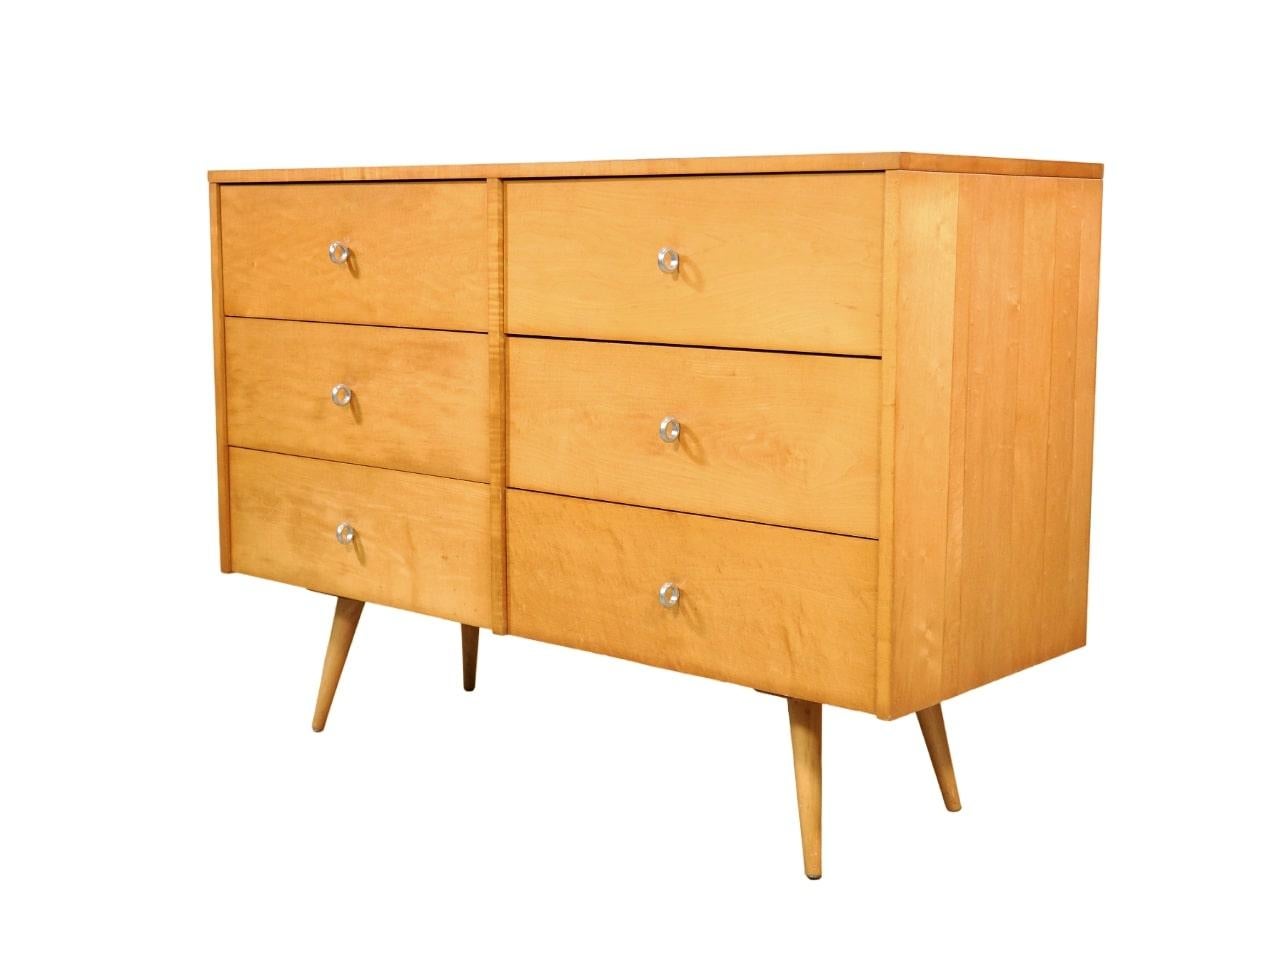 Mid-Century Modern Paul McCobb Maple Double Dresser Planner Group by Winchendon Furniture, 1950s For Sale